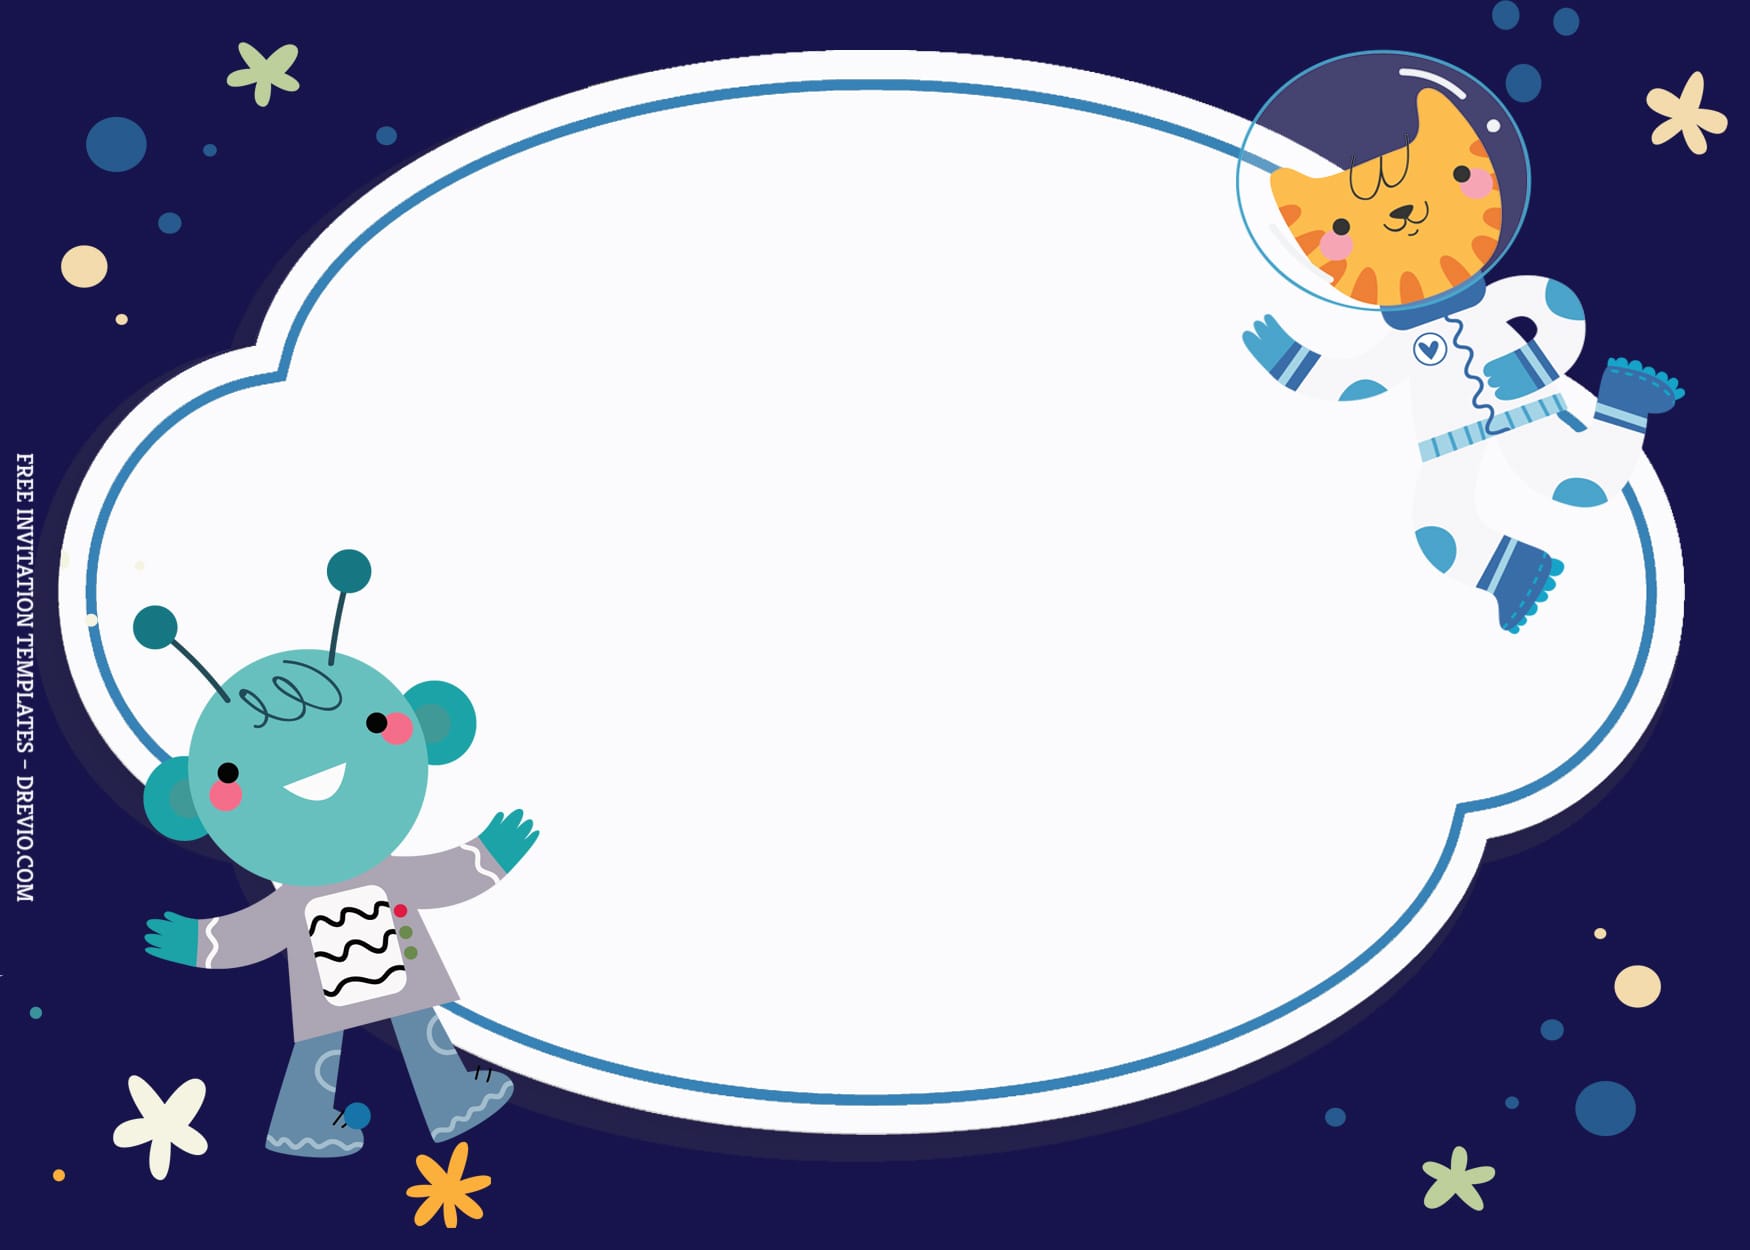 7+ Adorable Space Cat And Planets Birthday Invitation Templates Alien And Cat